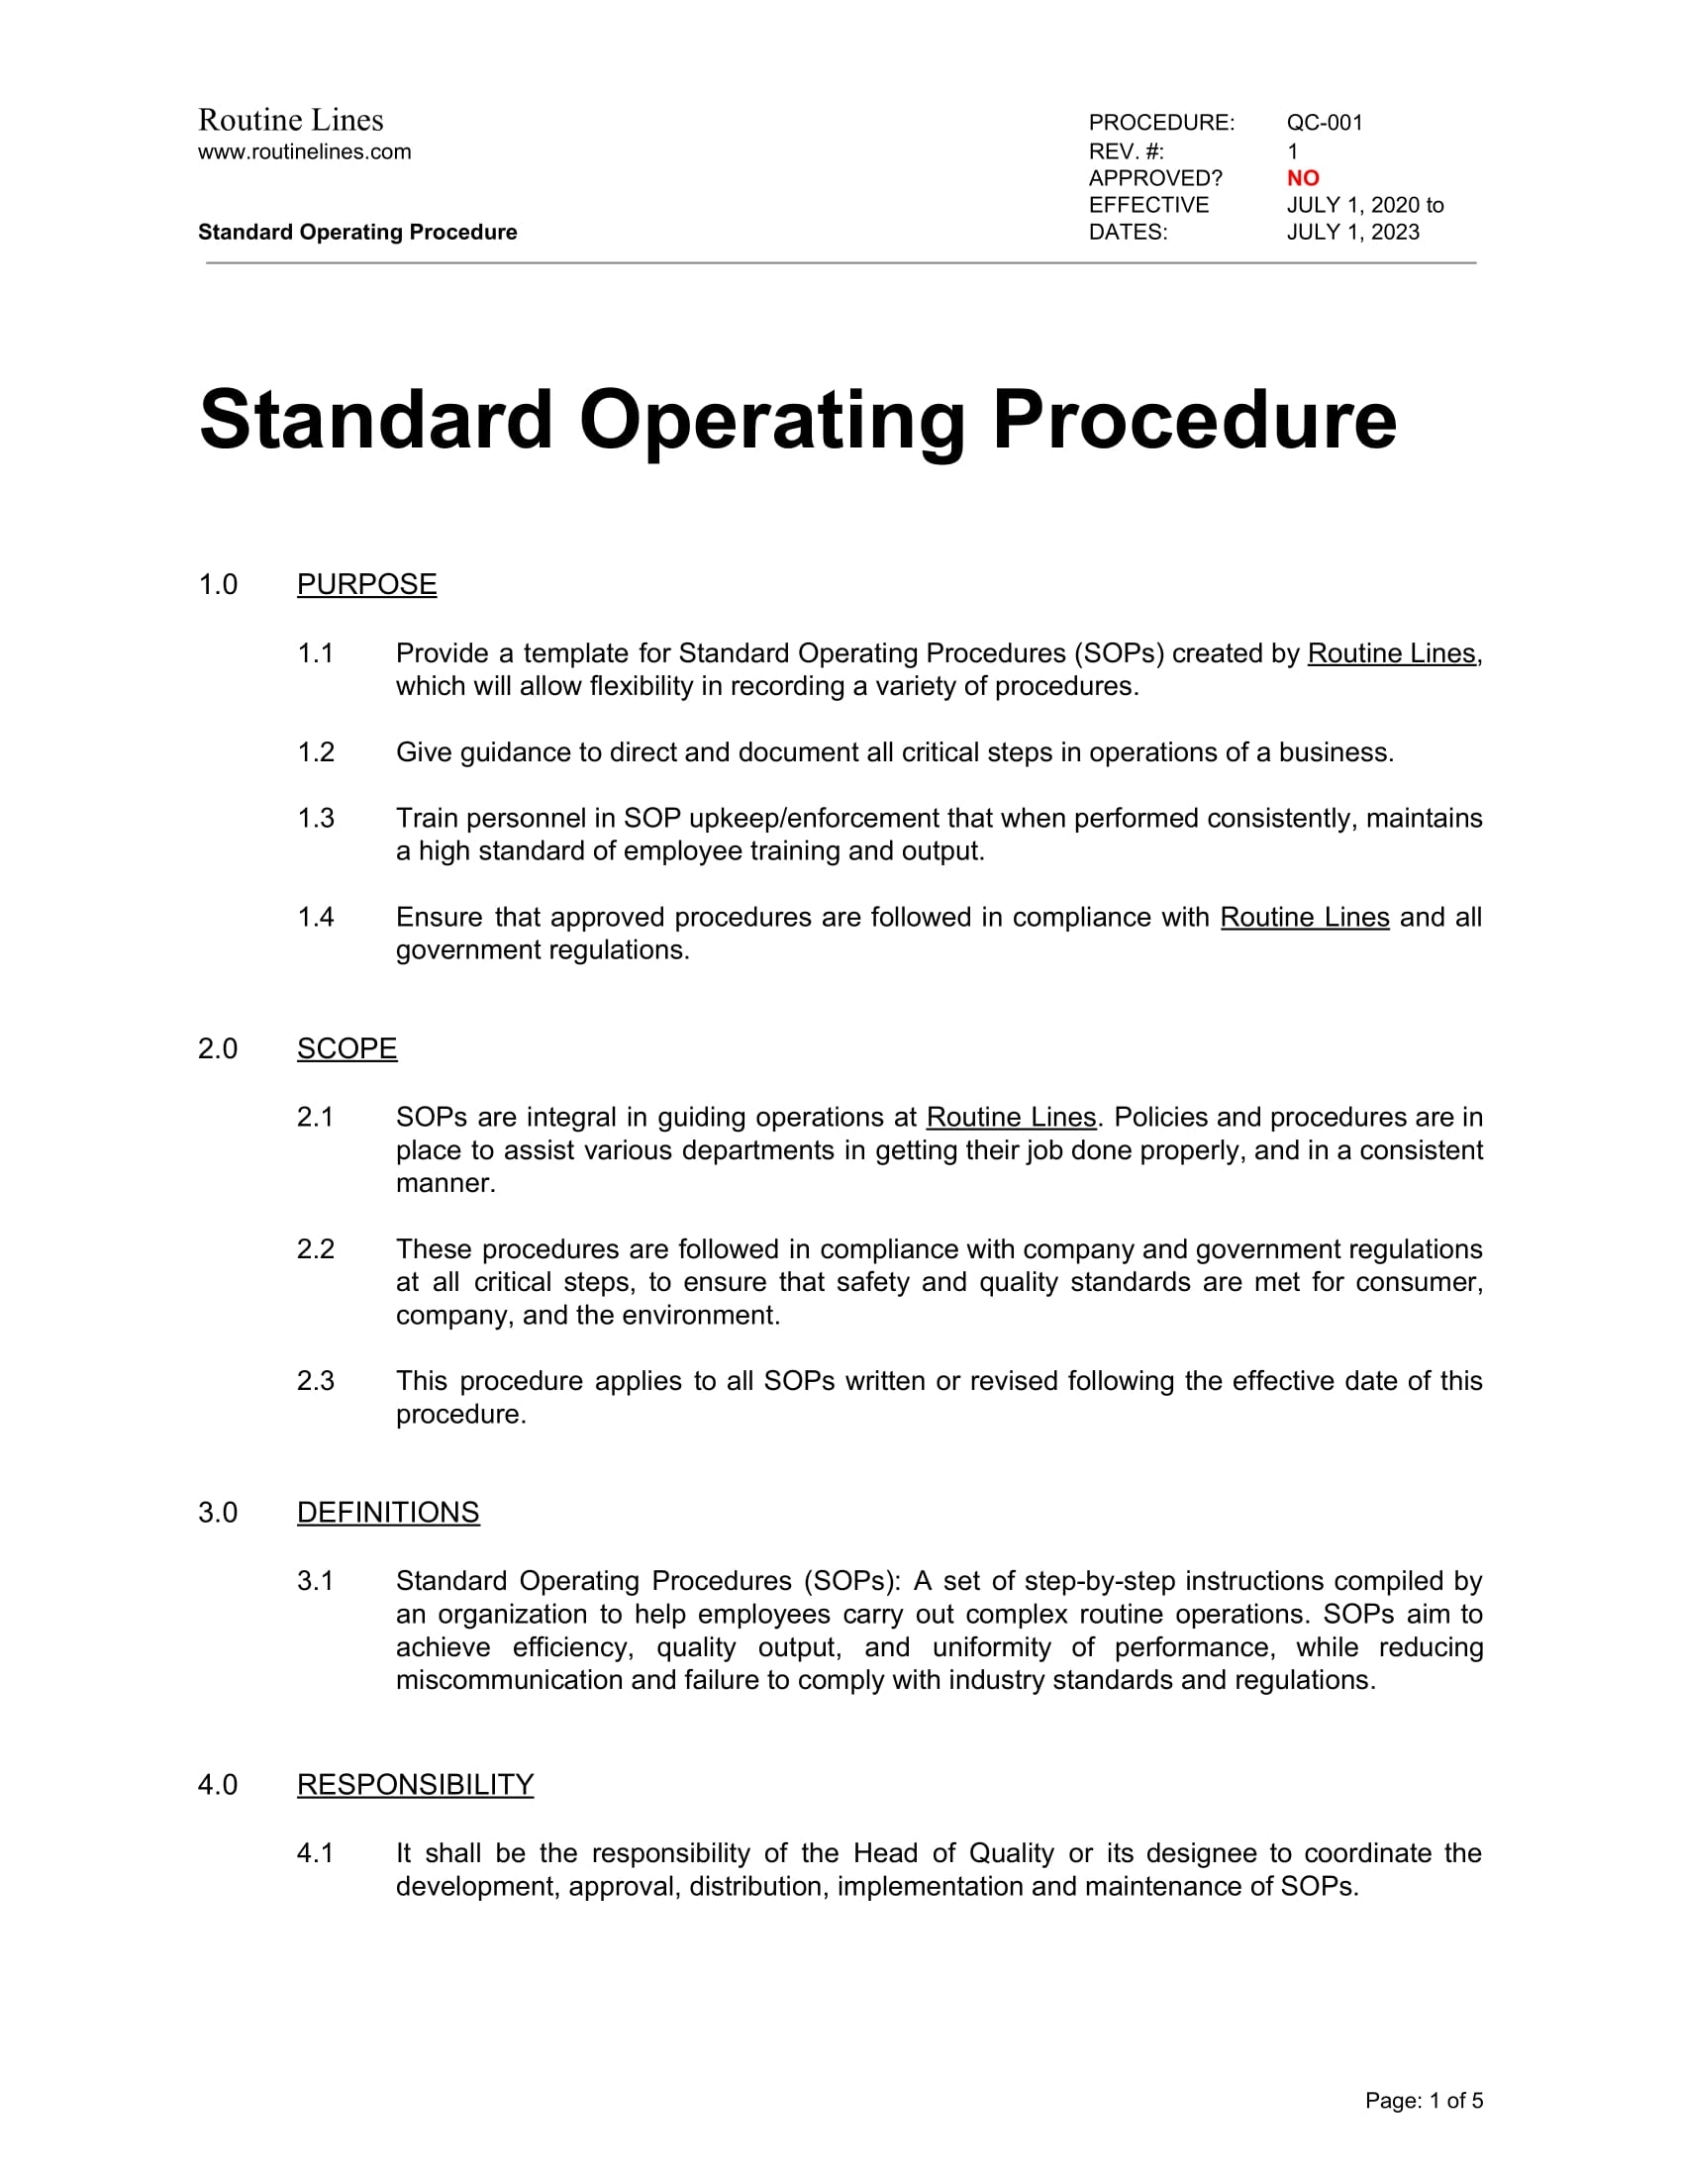 Standard Operating Procedure Template - Routine Lines with Procedure Note Template